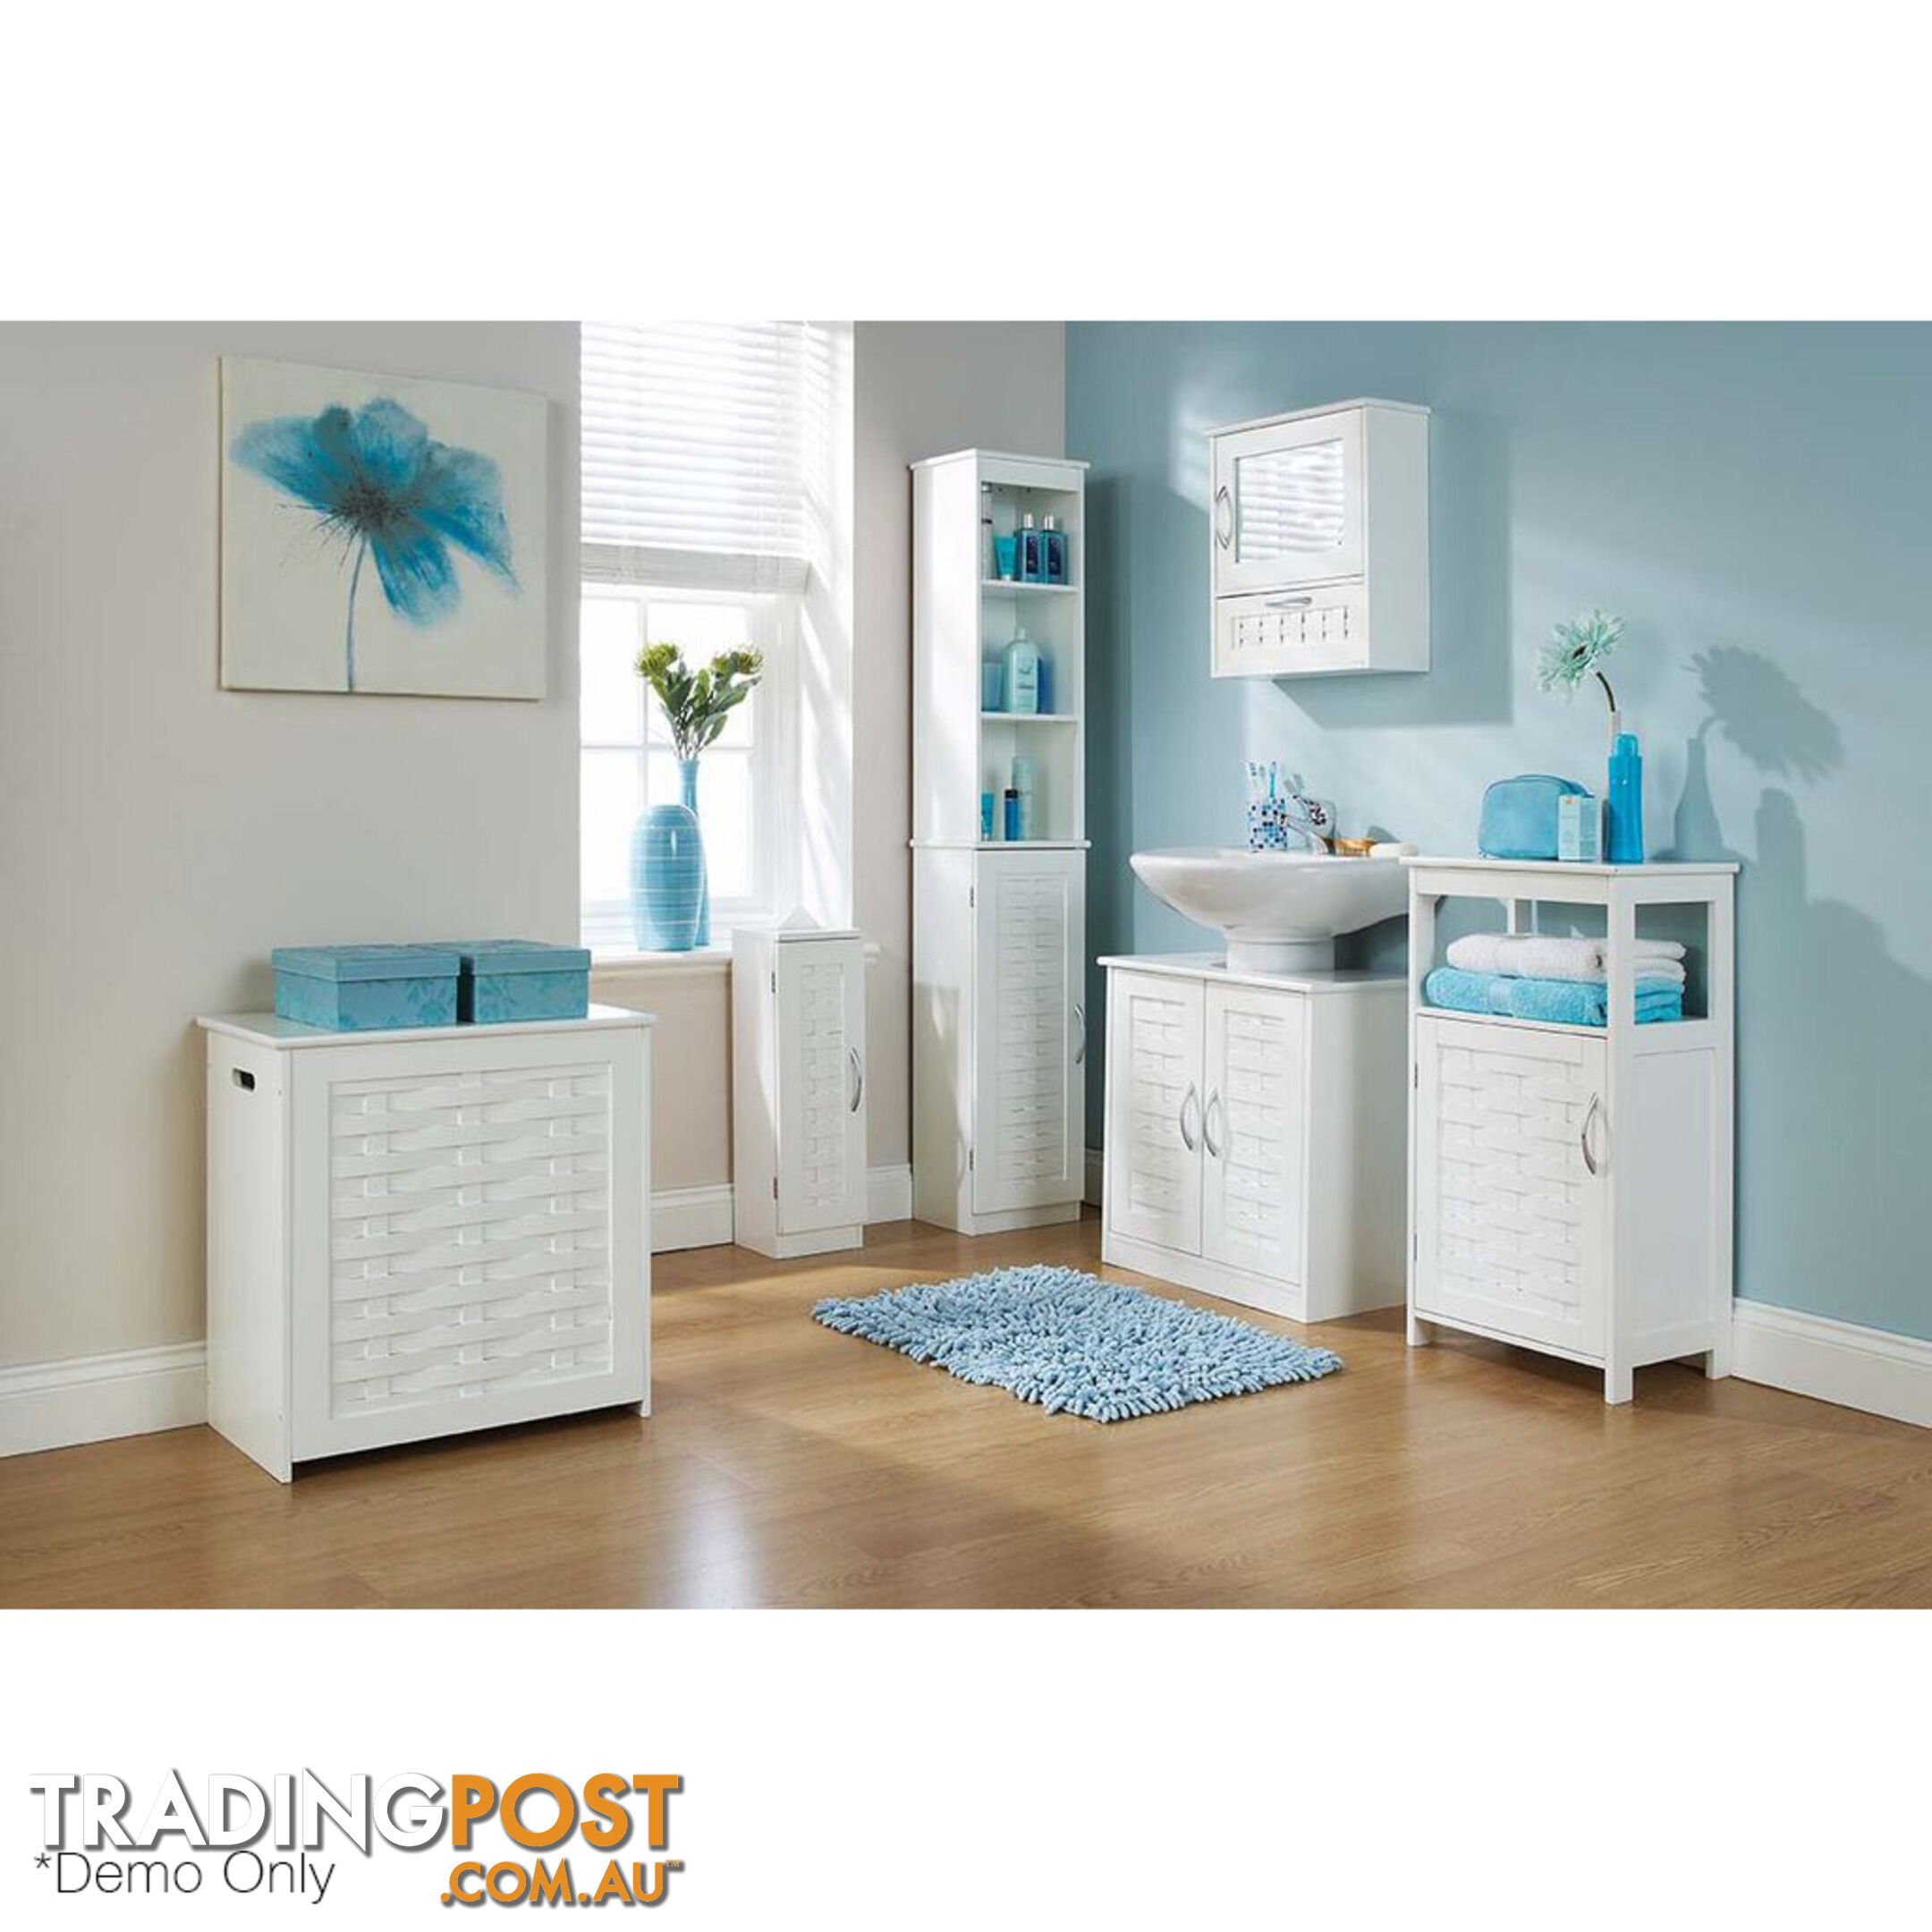 Weave Tall Unit in WHITE